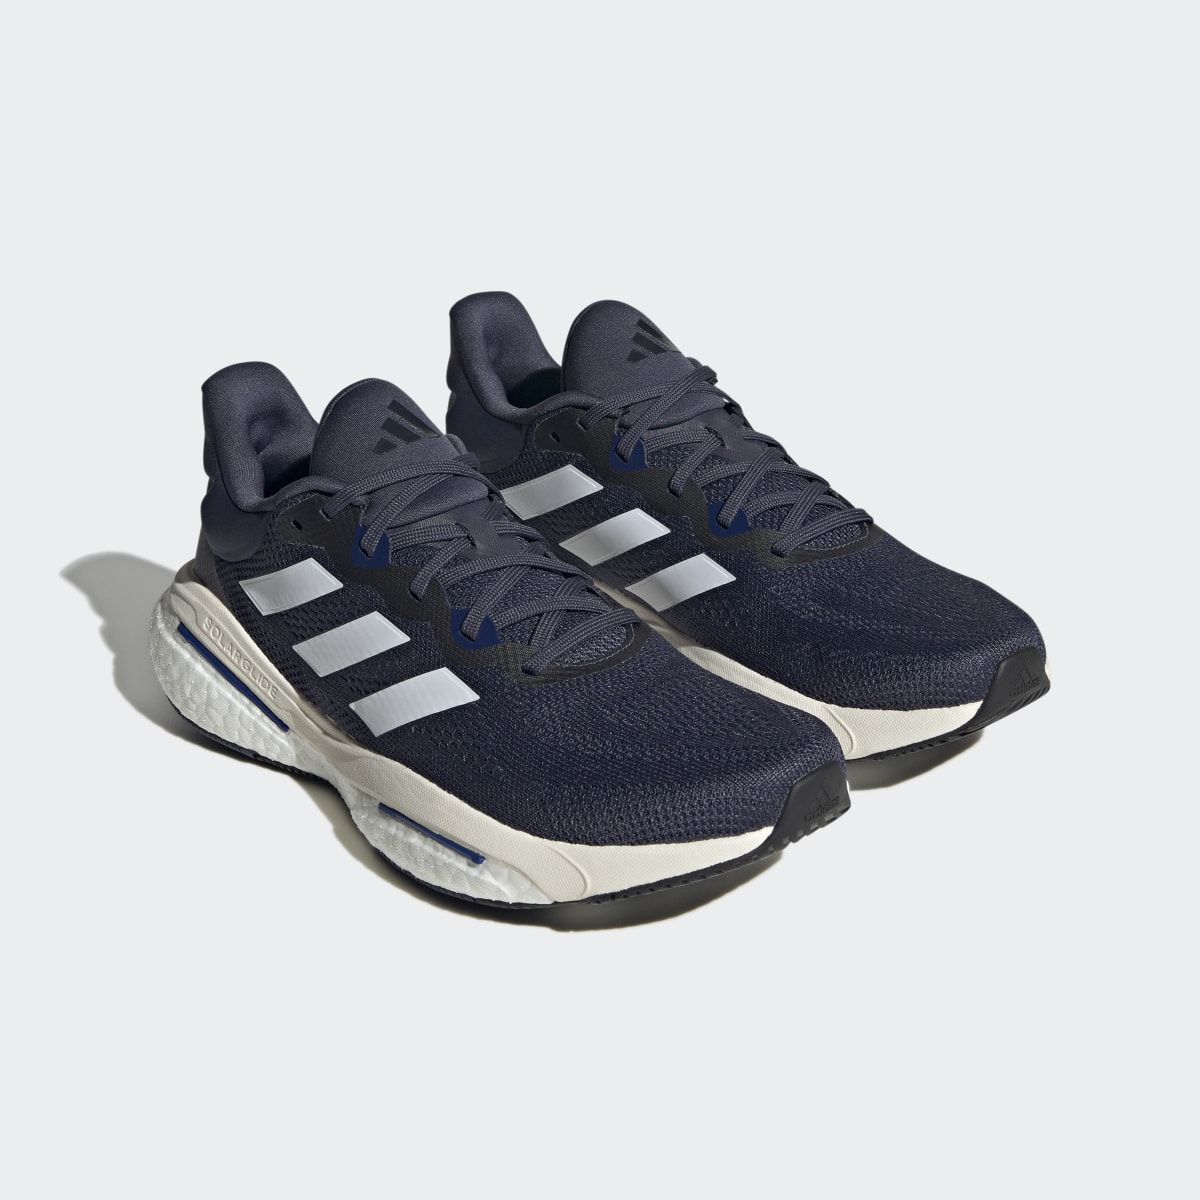 Adidas SOLARGLIDE 6 Shoes. 5